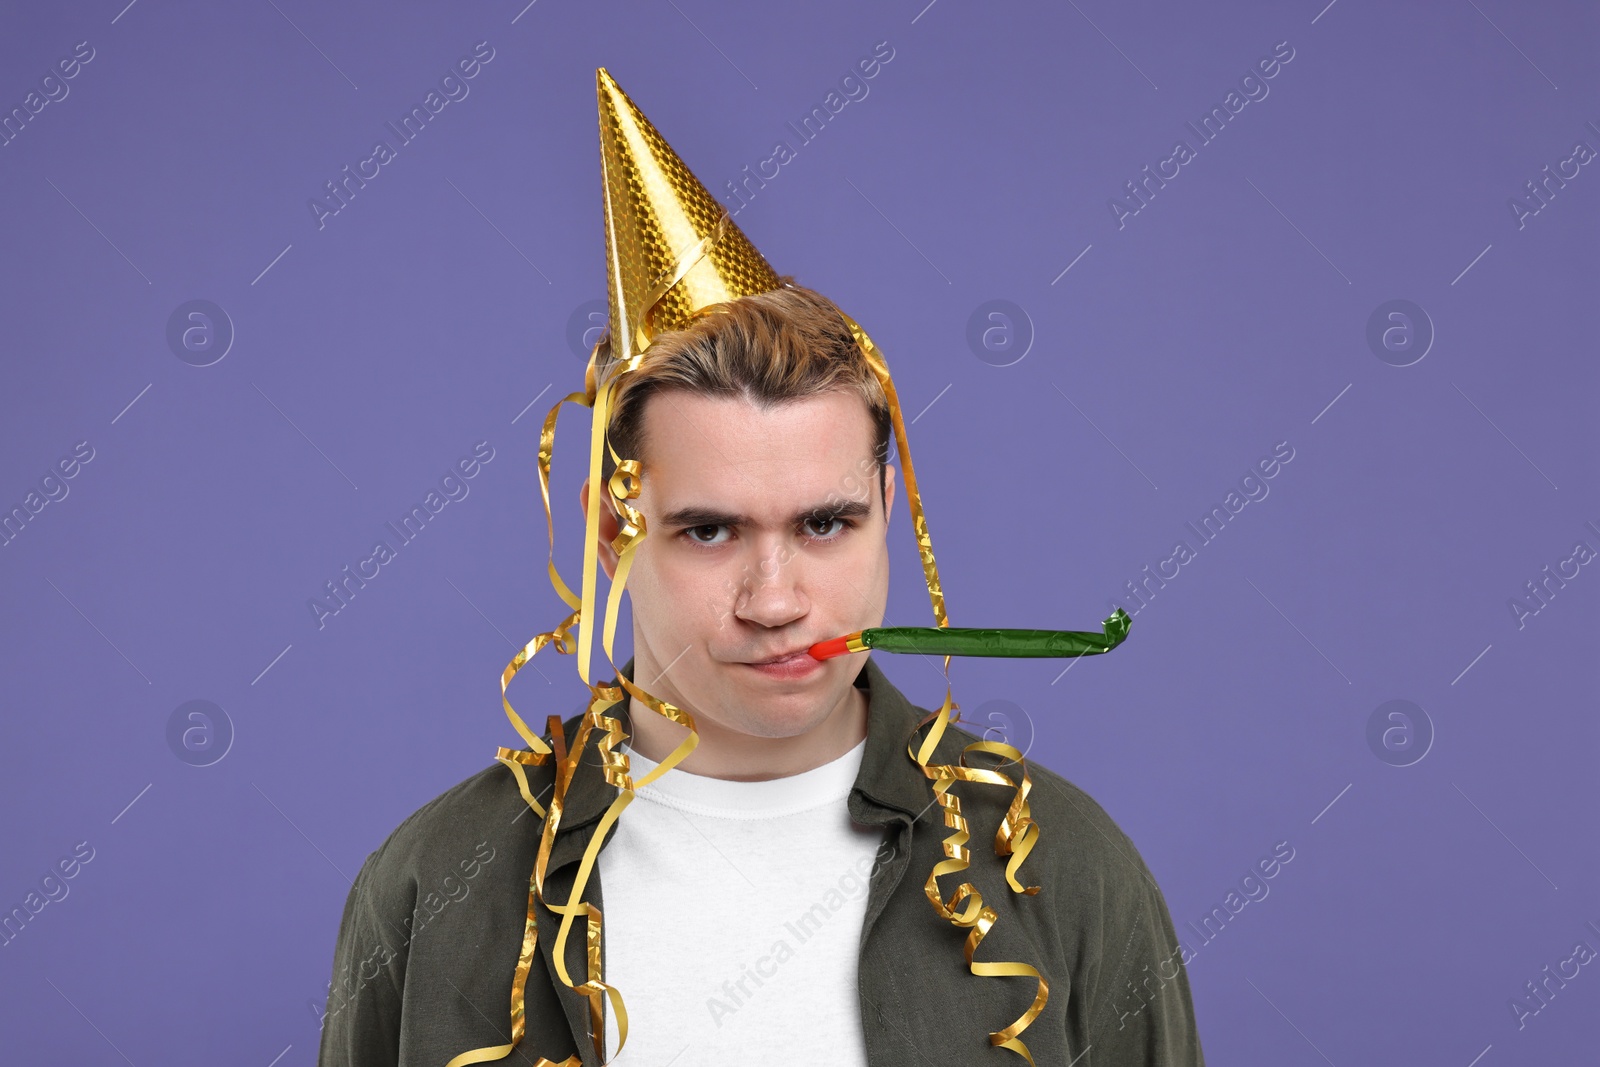 Photo of Sad young man with party hat and blower on purple background